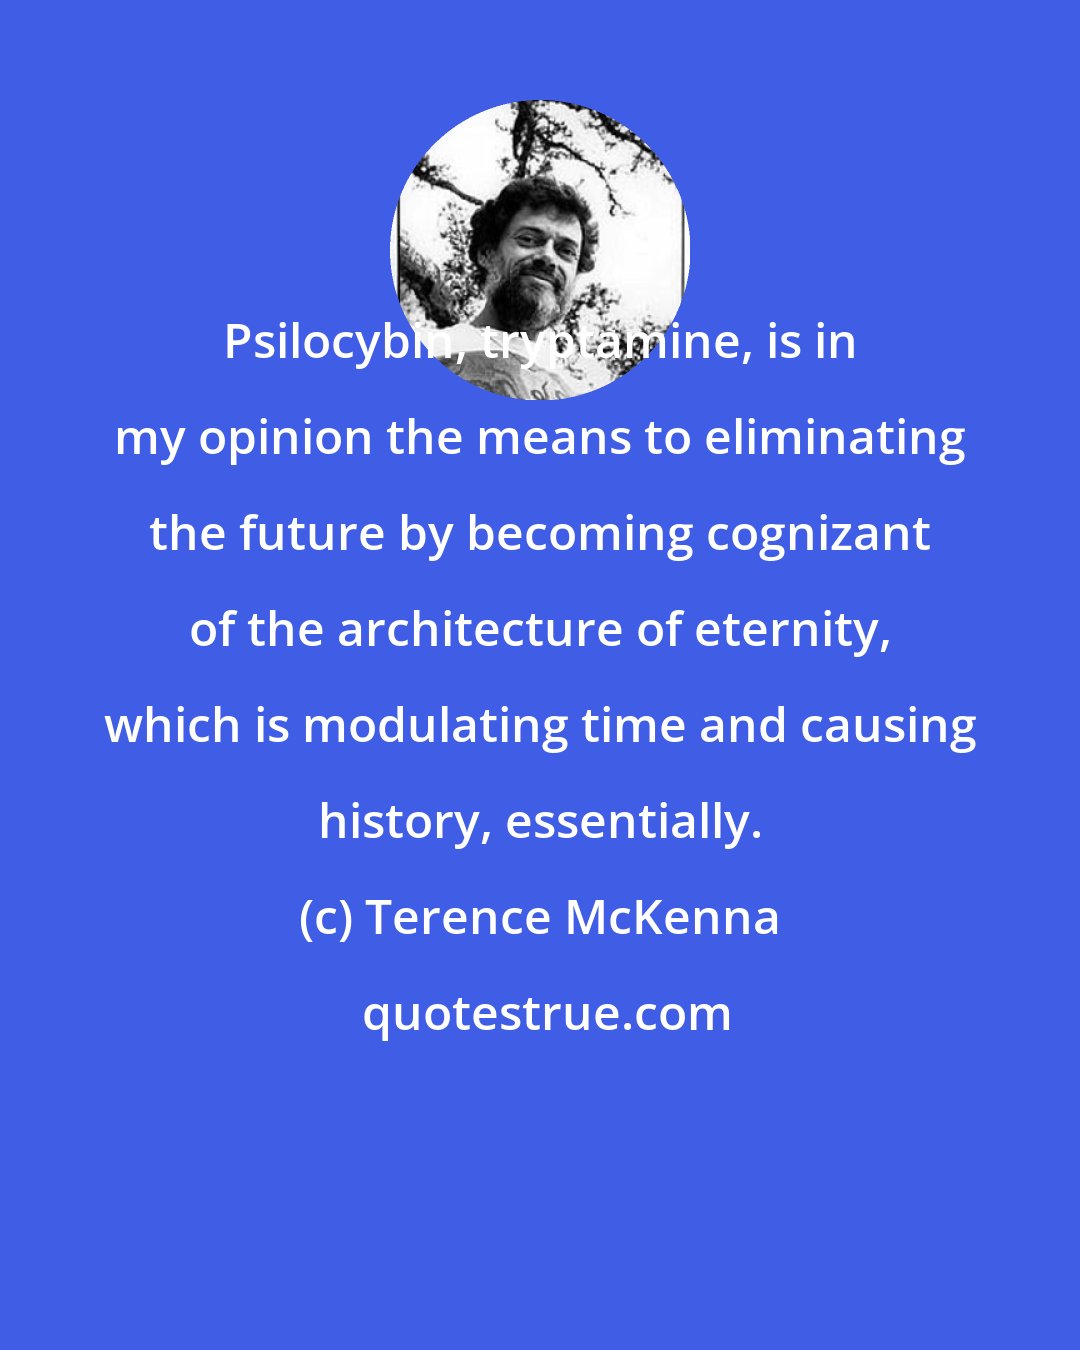 Terence McKenna: Psilocybin, tryptamine, is in my opinion the means to eliminating the future by becoming cognizant of the architecture of eternity, which is modulating time and causing history, essentially.